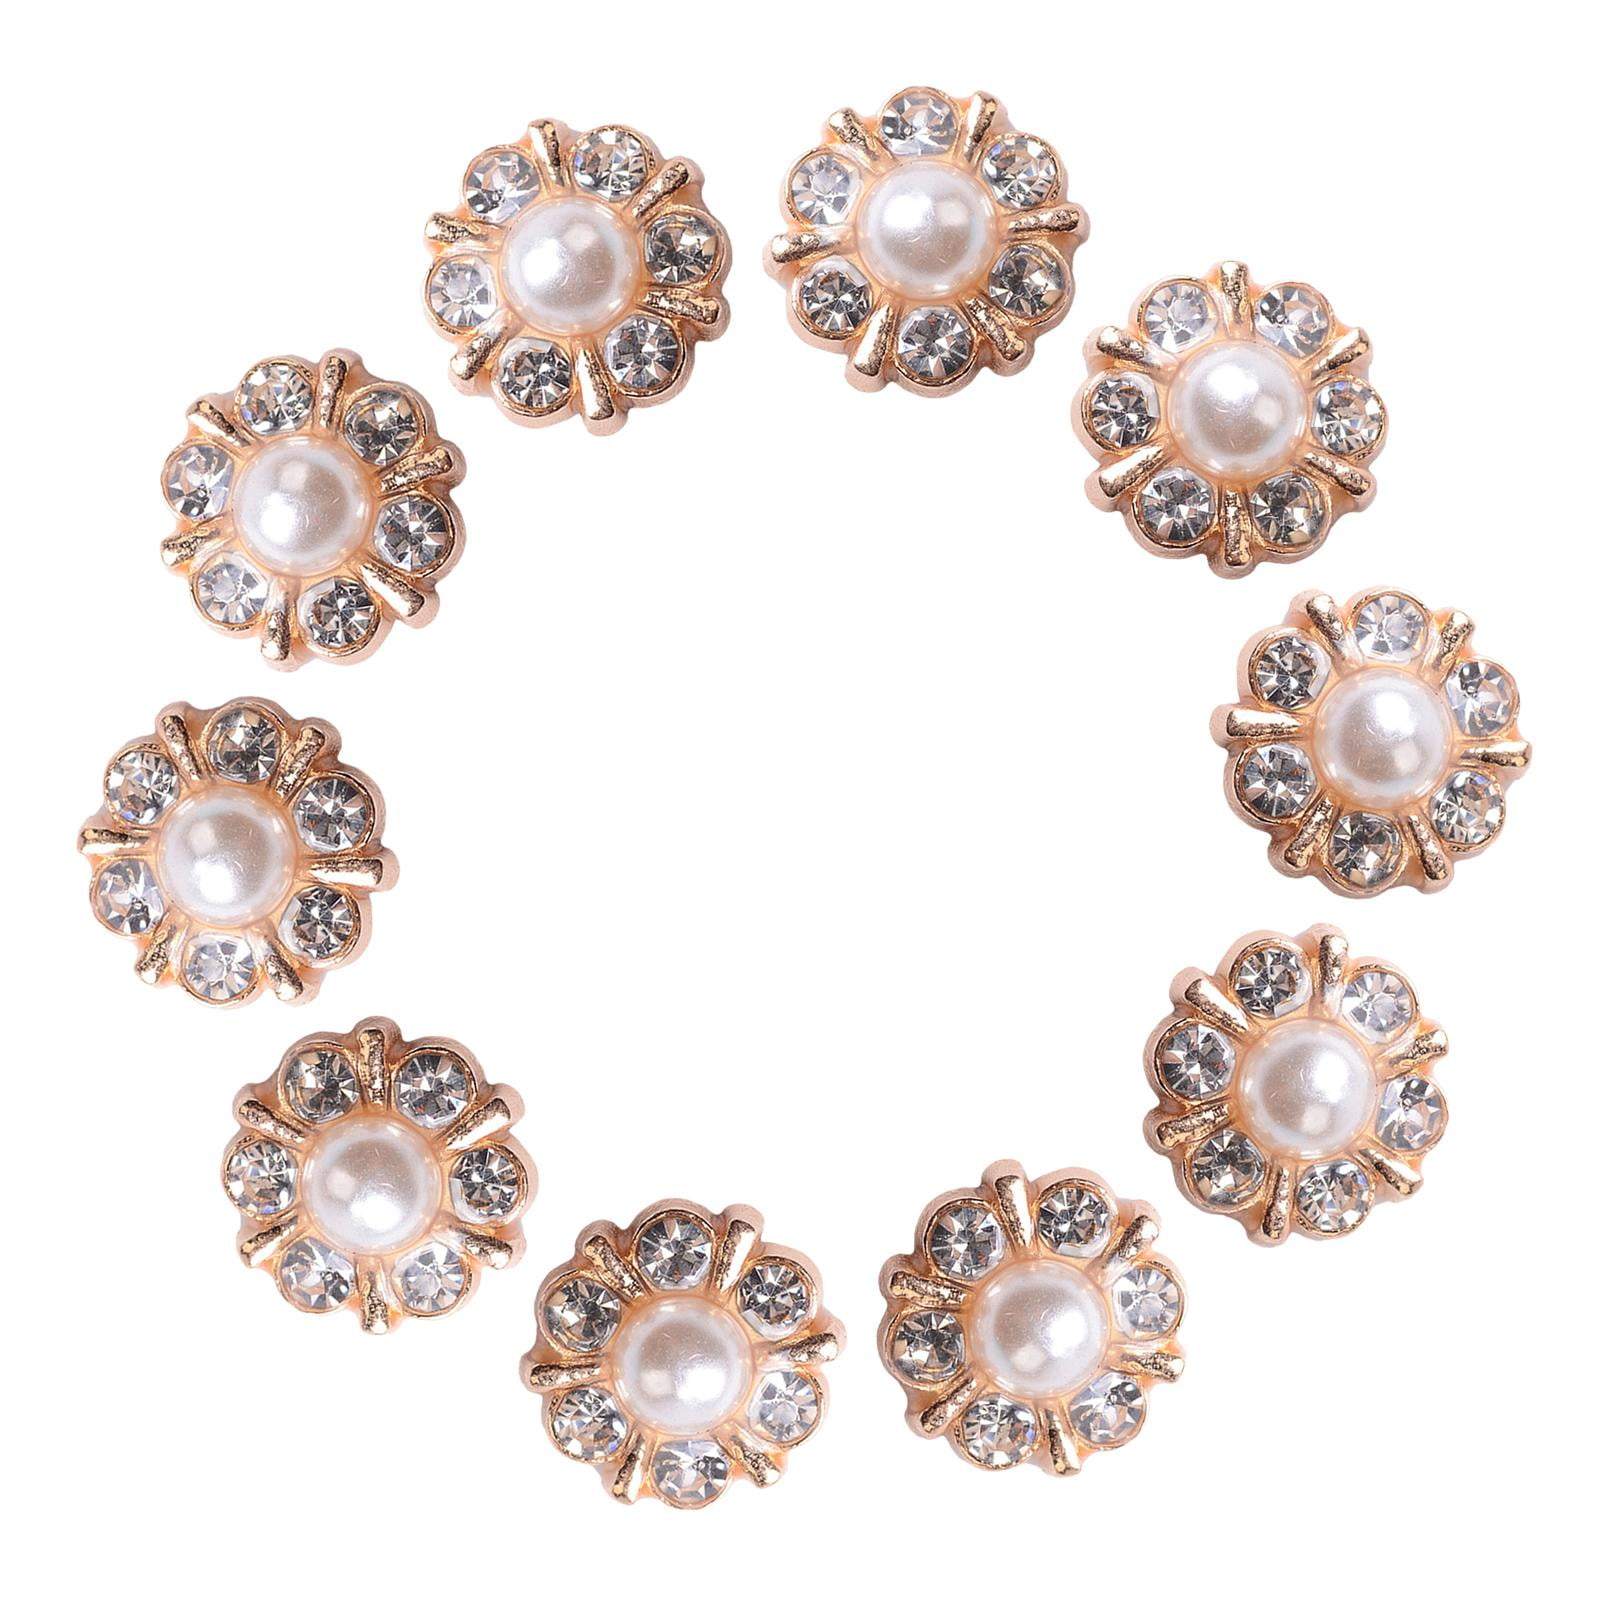 10pk Pearl Pins With Clear Glass Stones & Pearl Flower by Bloom Room